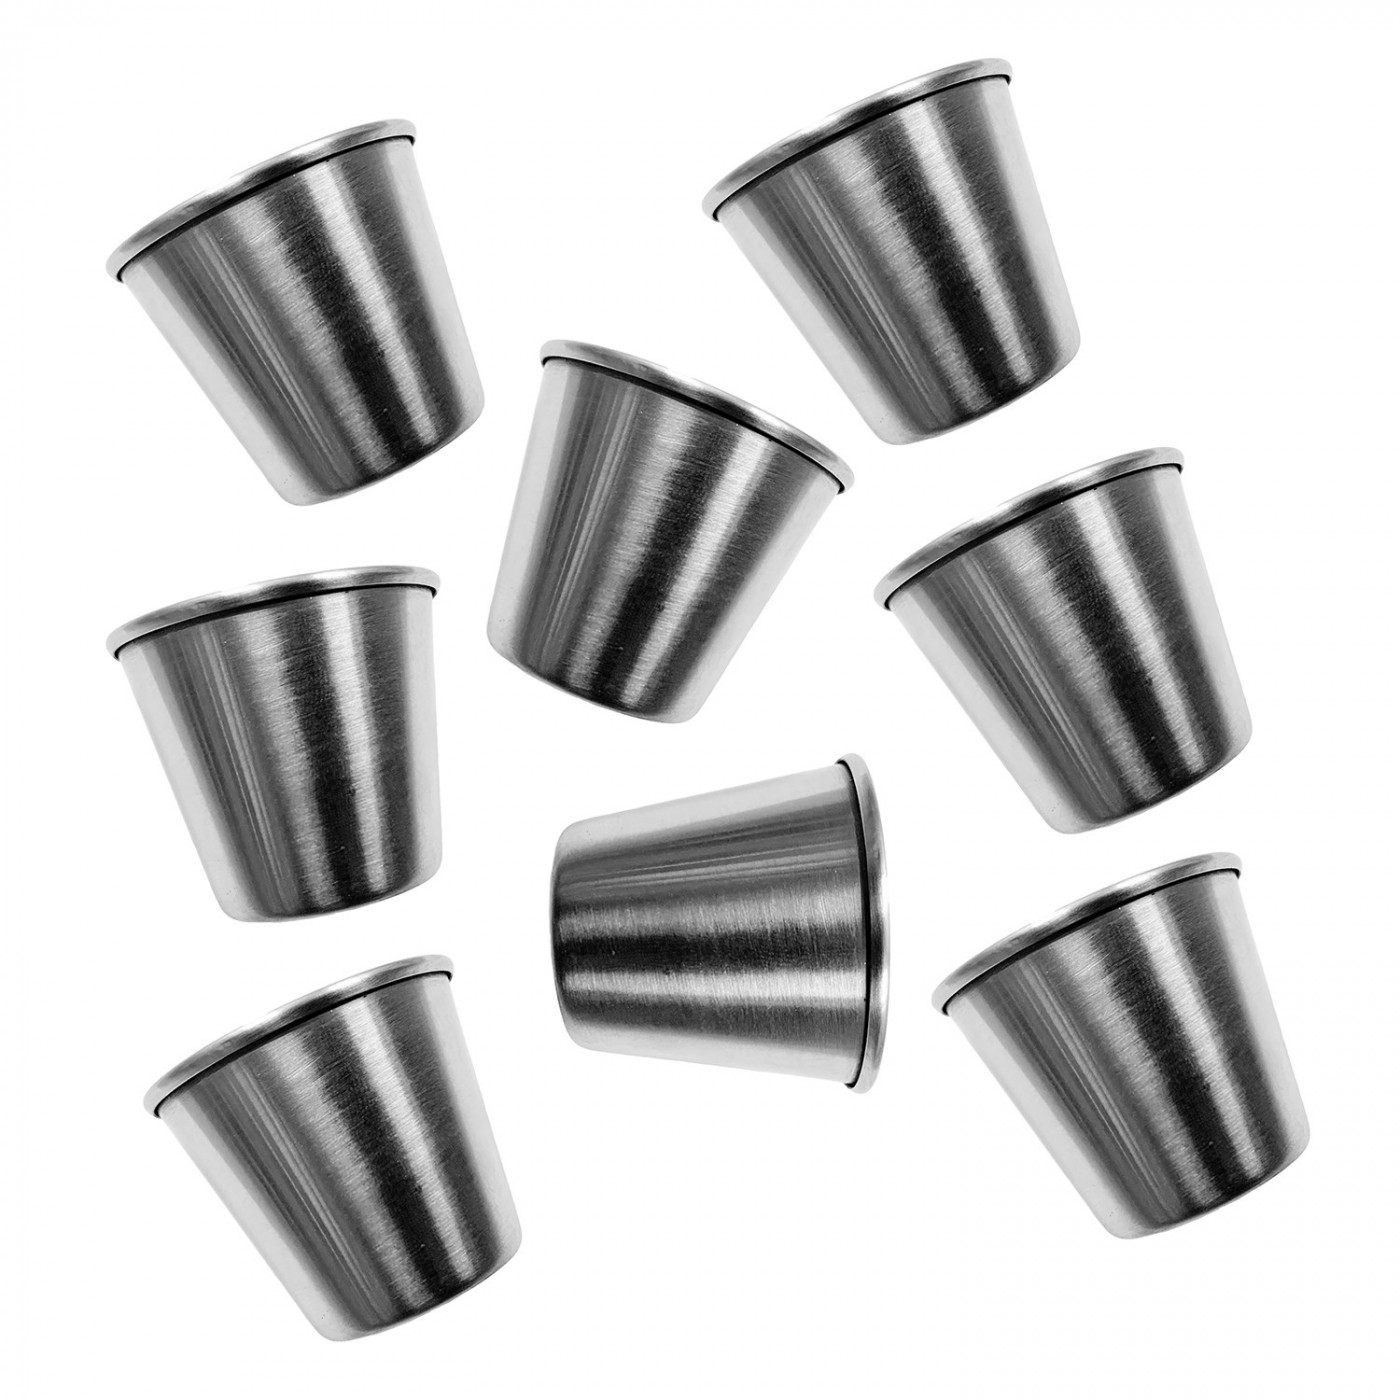 https://www.woodtoolsanddeco.com/8247-large_default/set-of-20-stainless-steel-cups-44-ml-with-rolled-edge.jpg